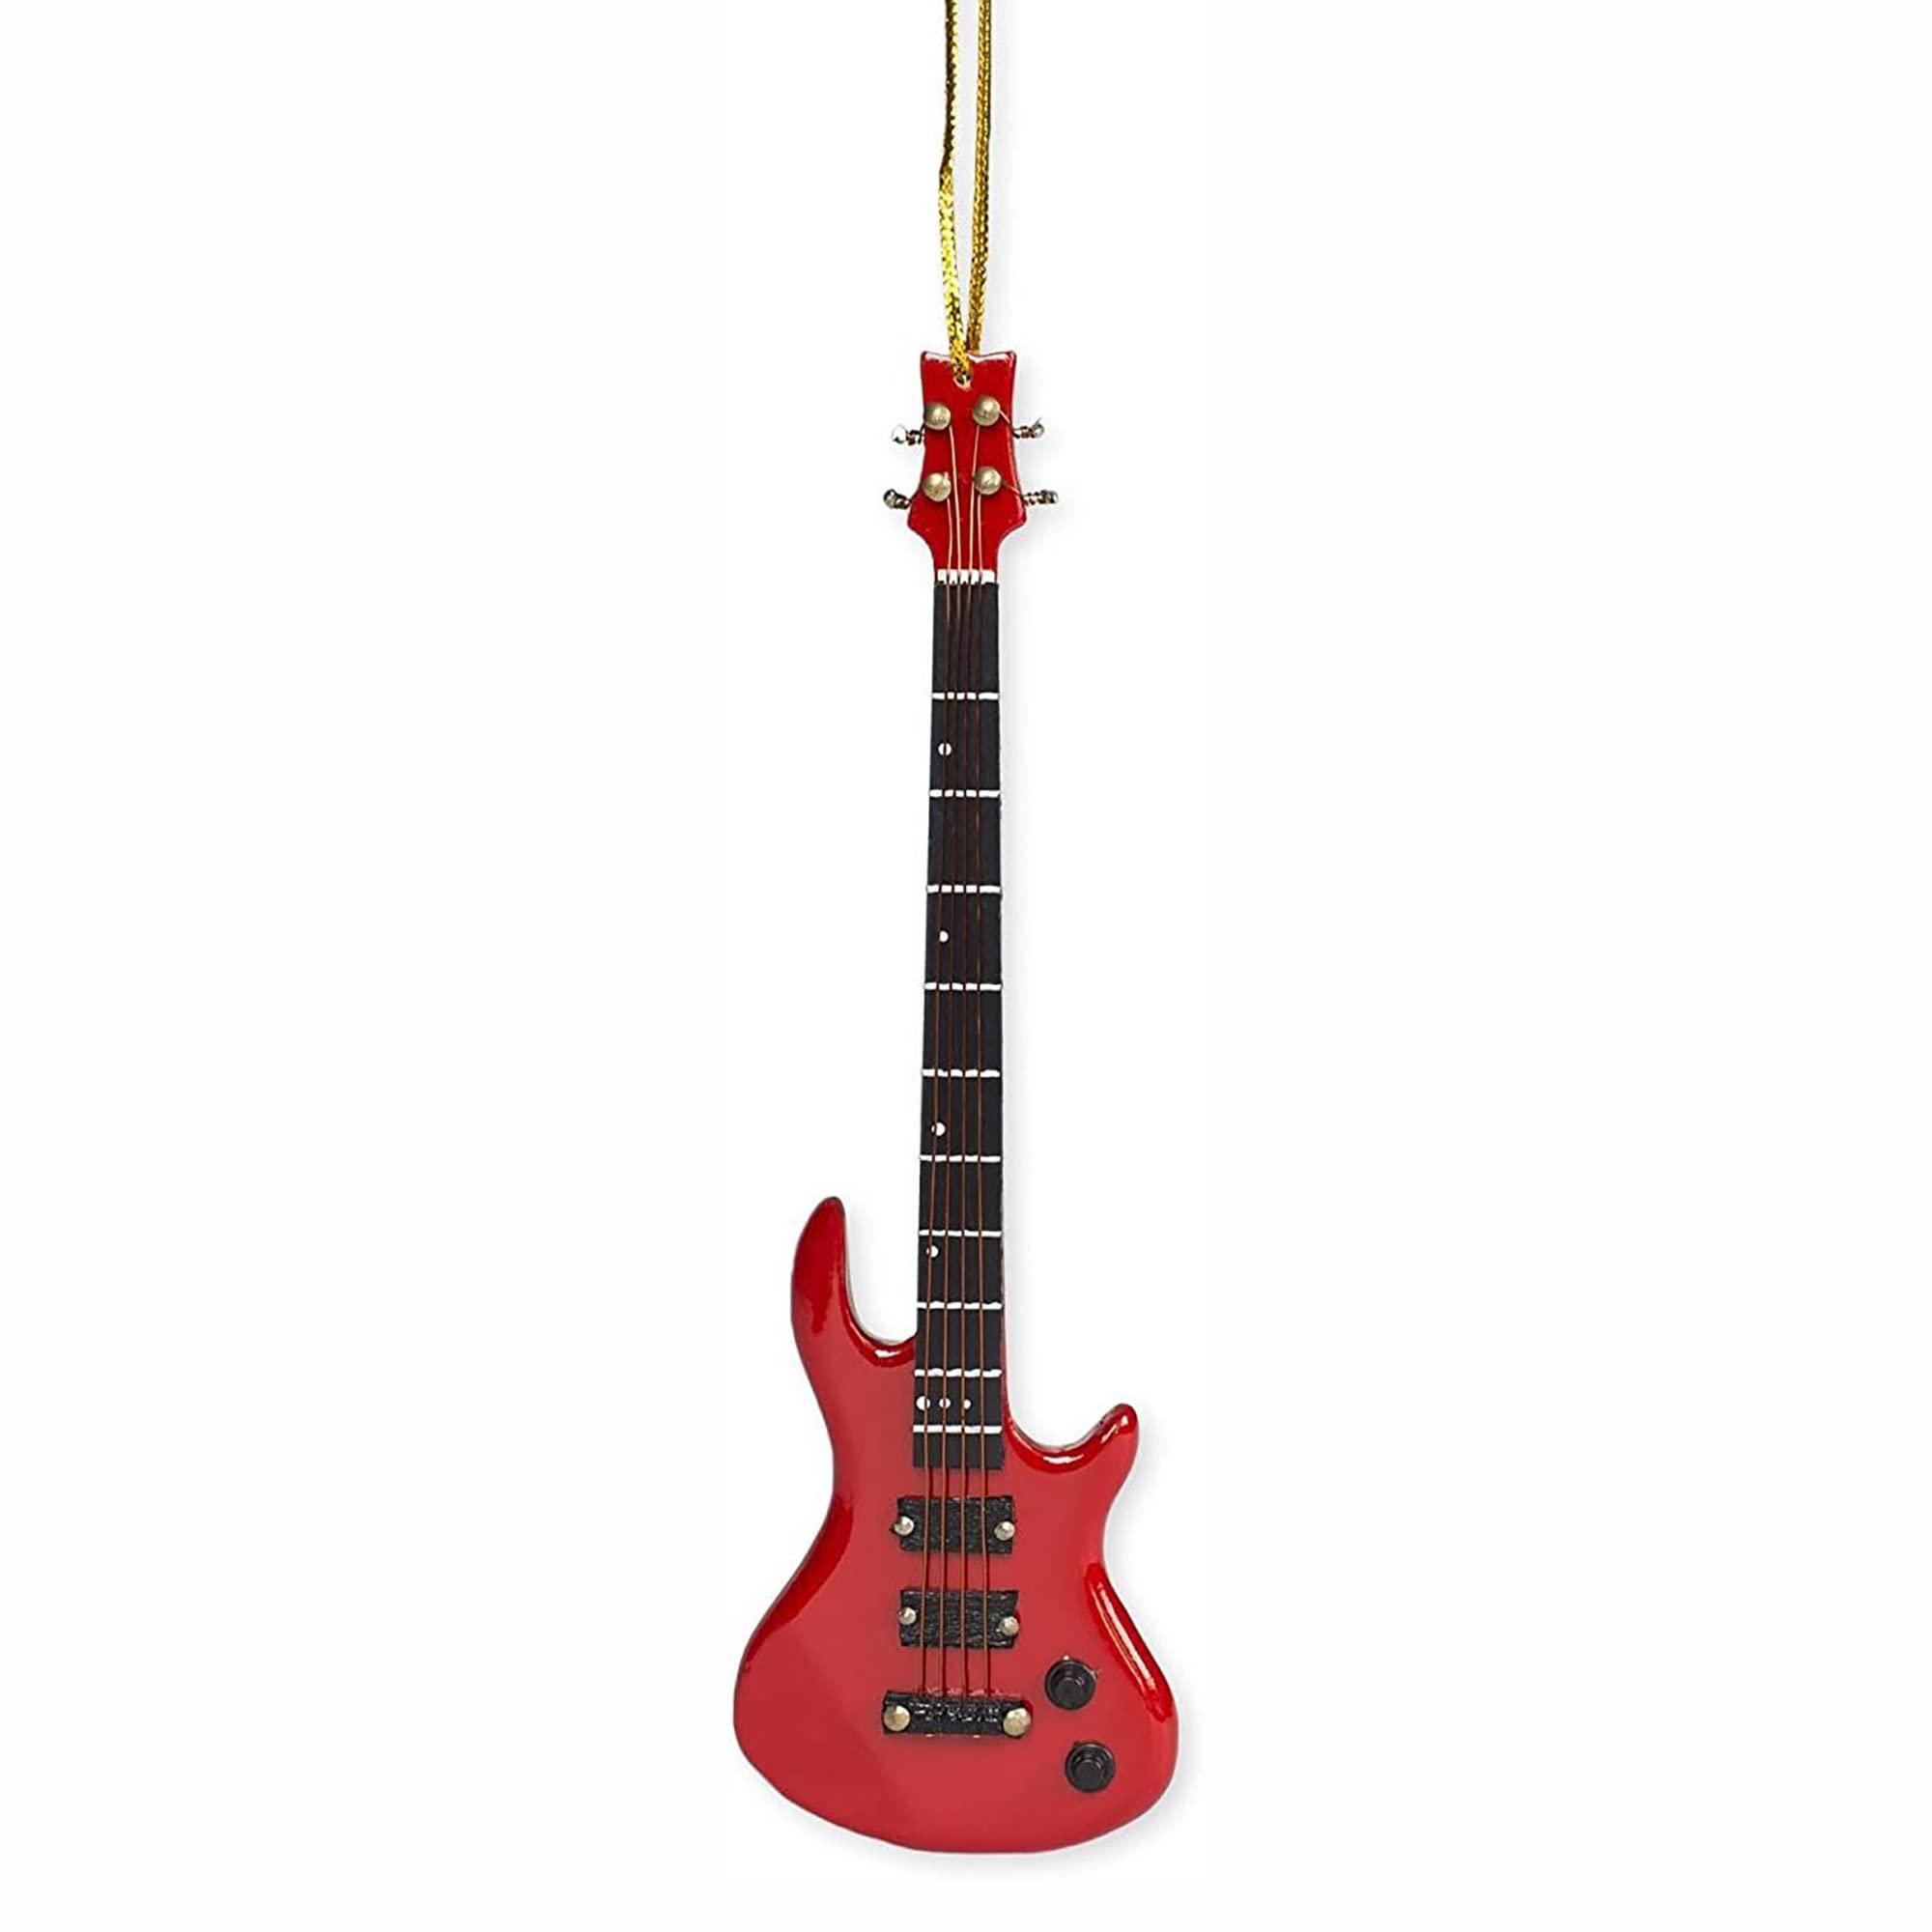 broadway gifts co. broadway gift electric bass guitar red 5.5 inch wood hanging christmas ornament decoration